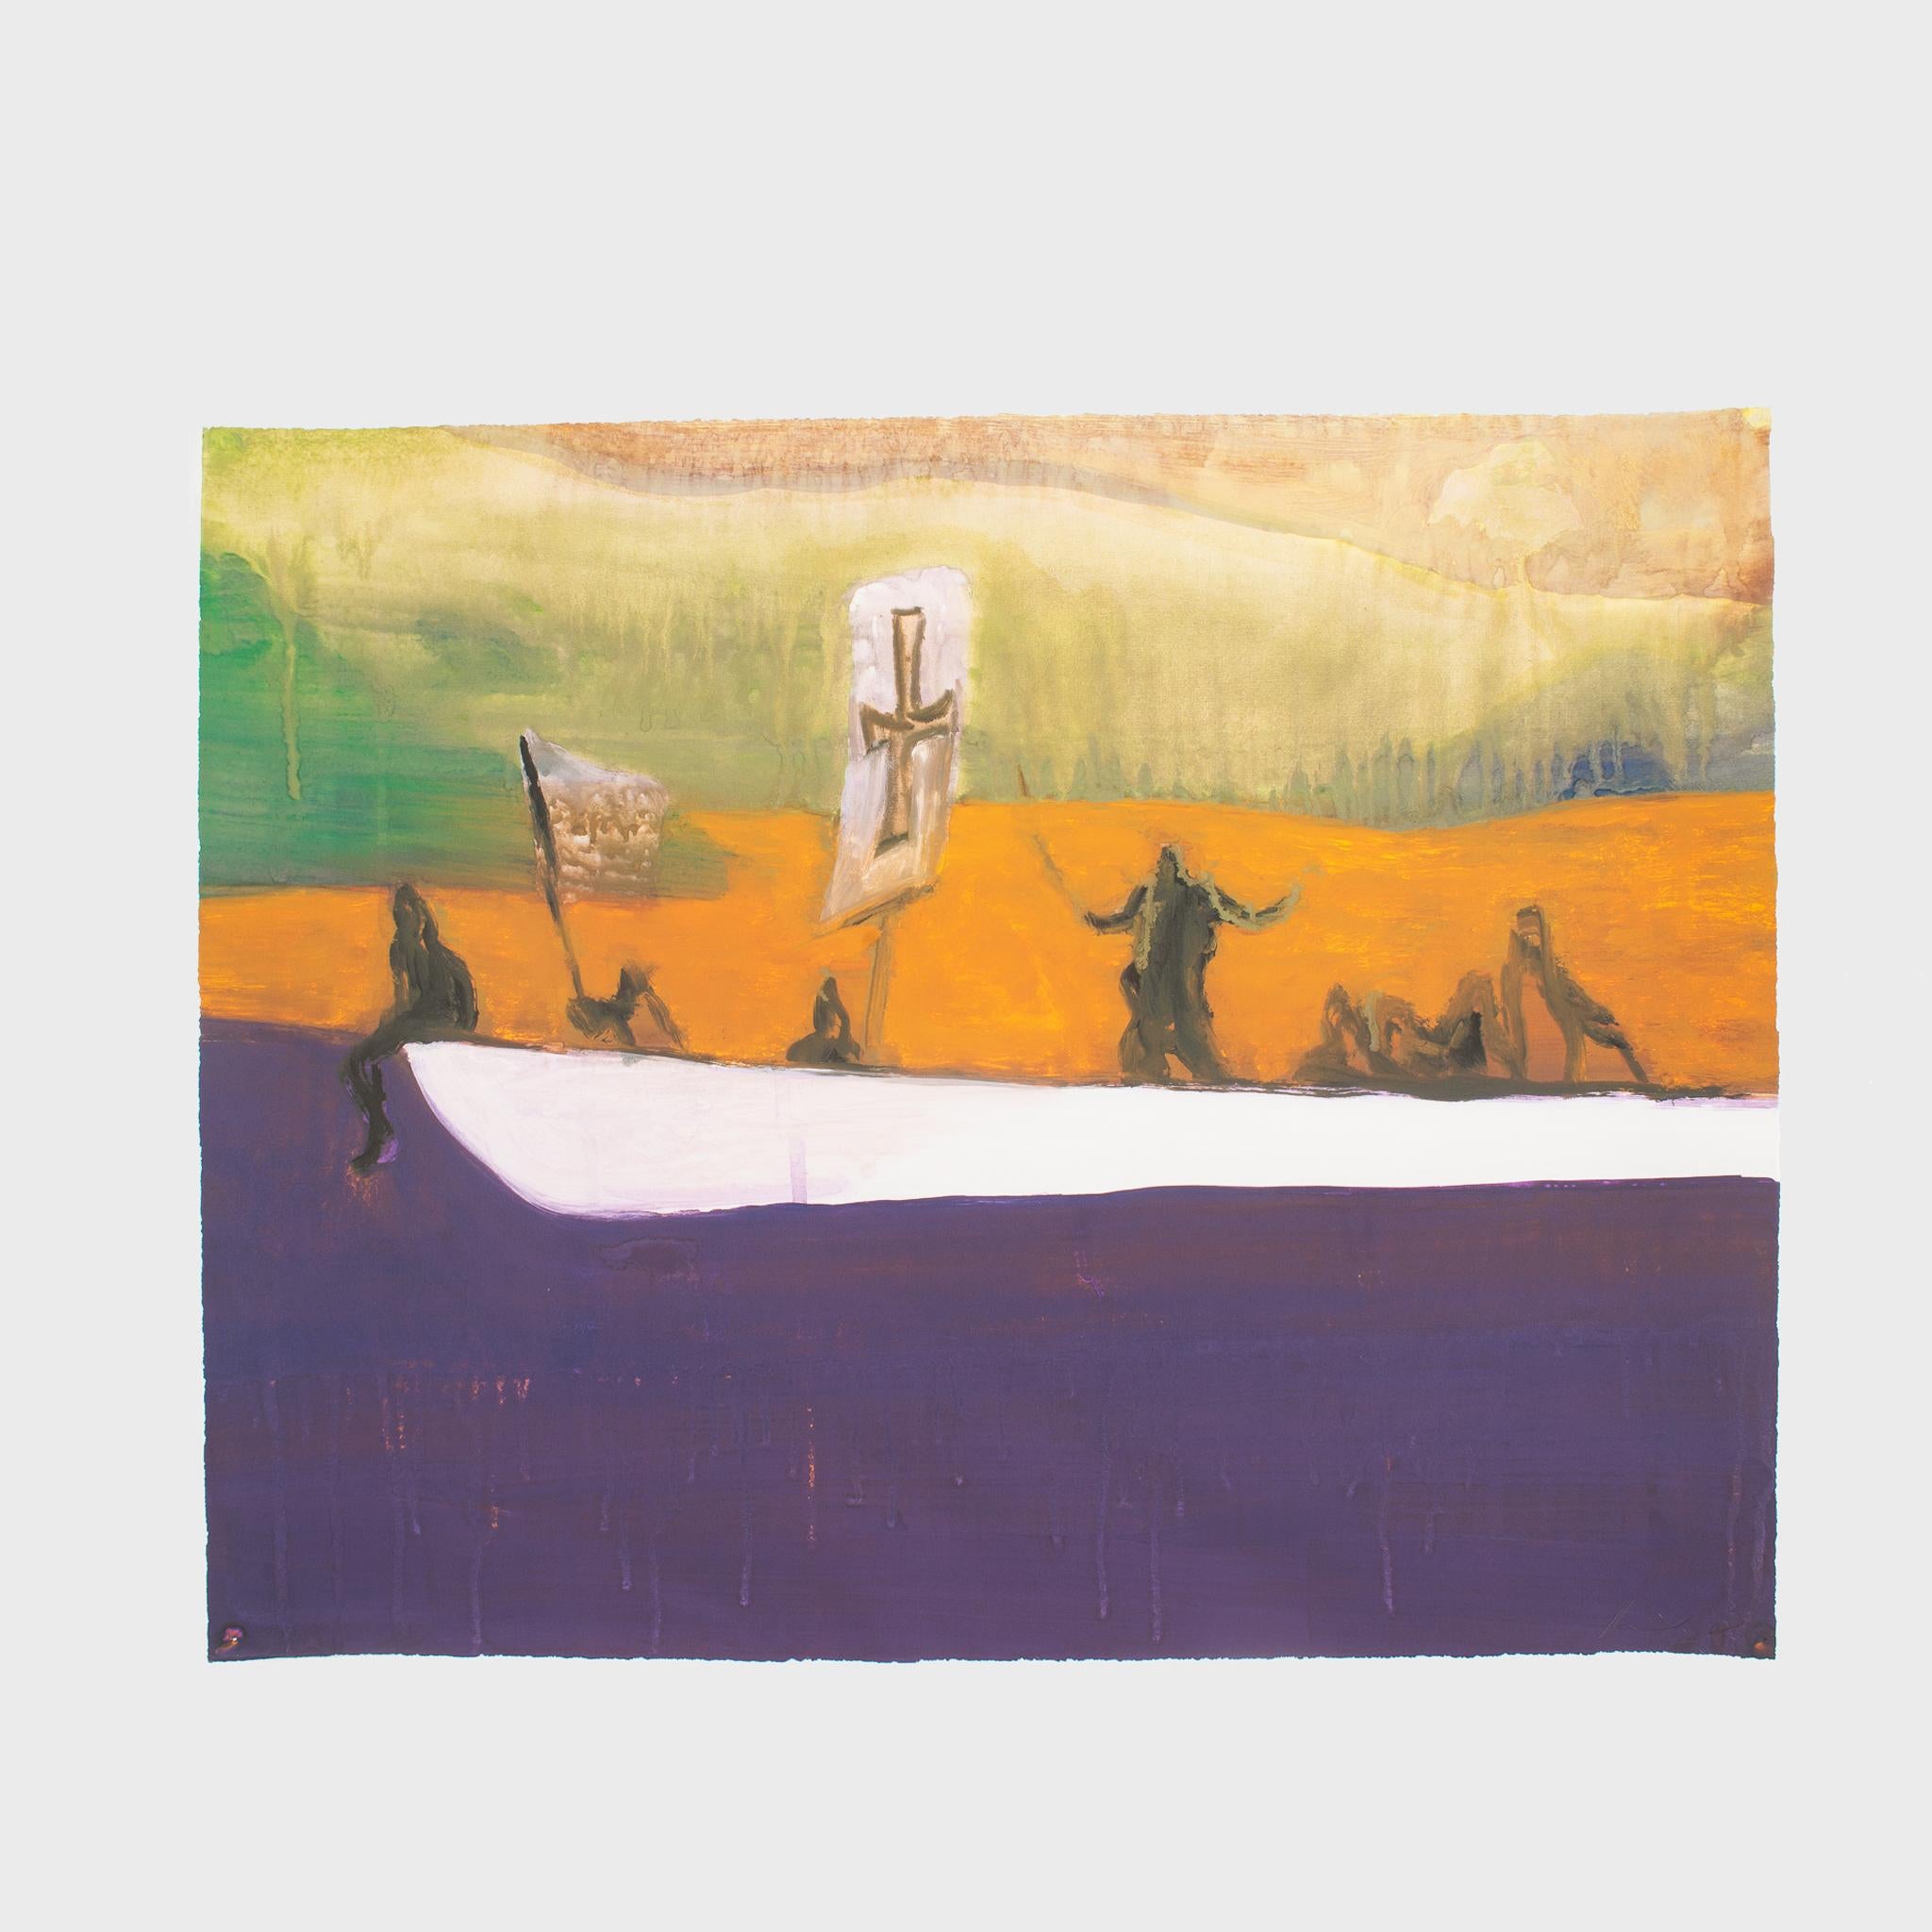 Untitled (Canoe) - Print by Peter Doig